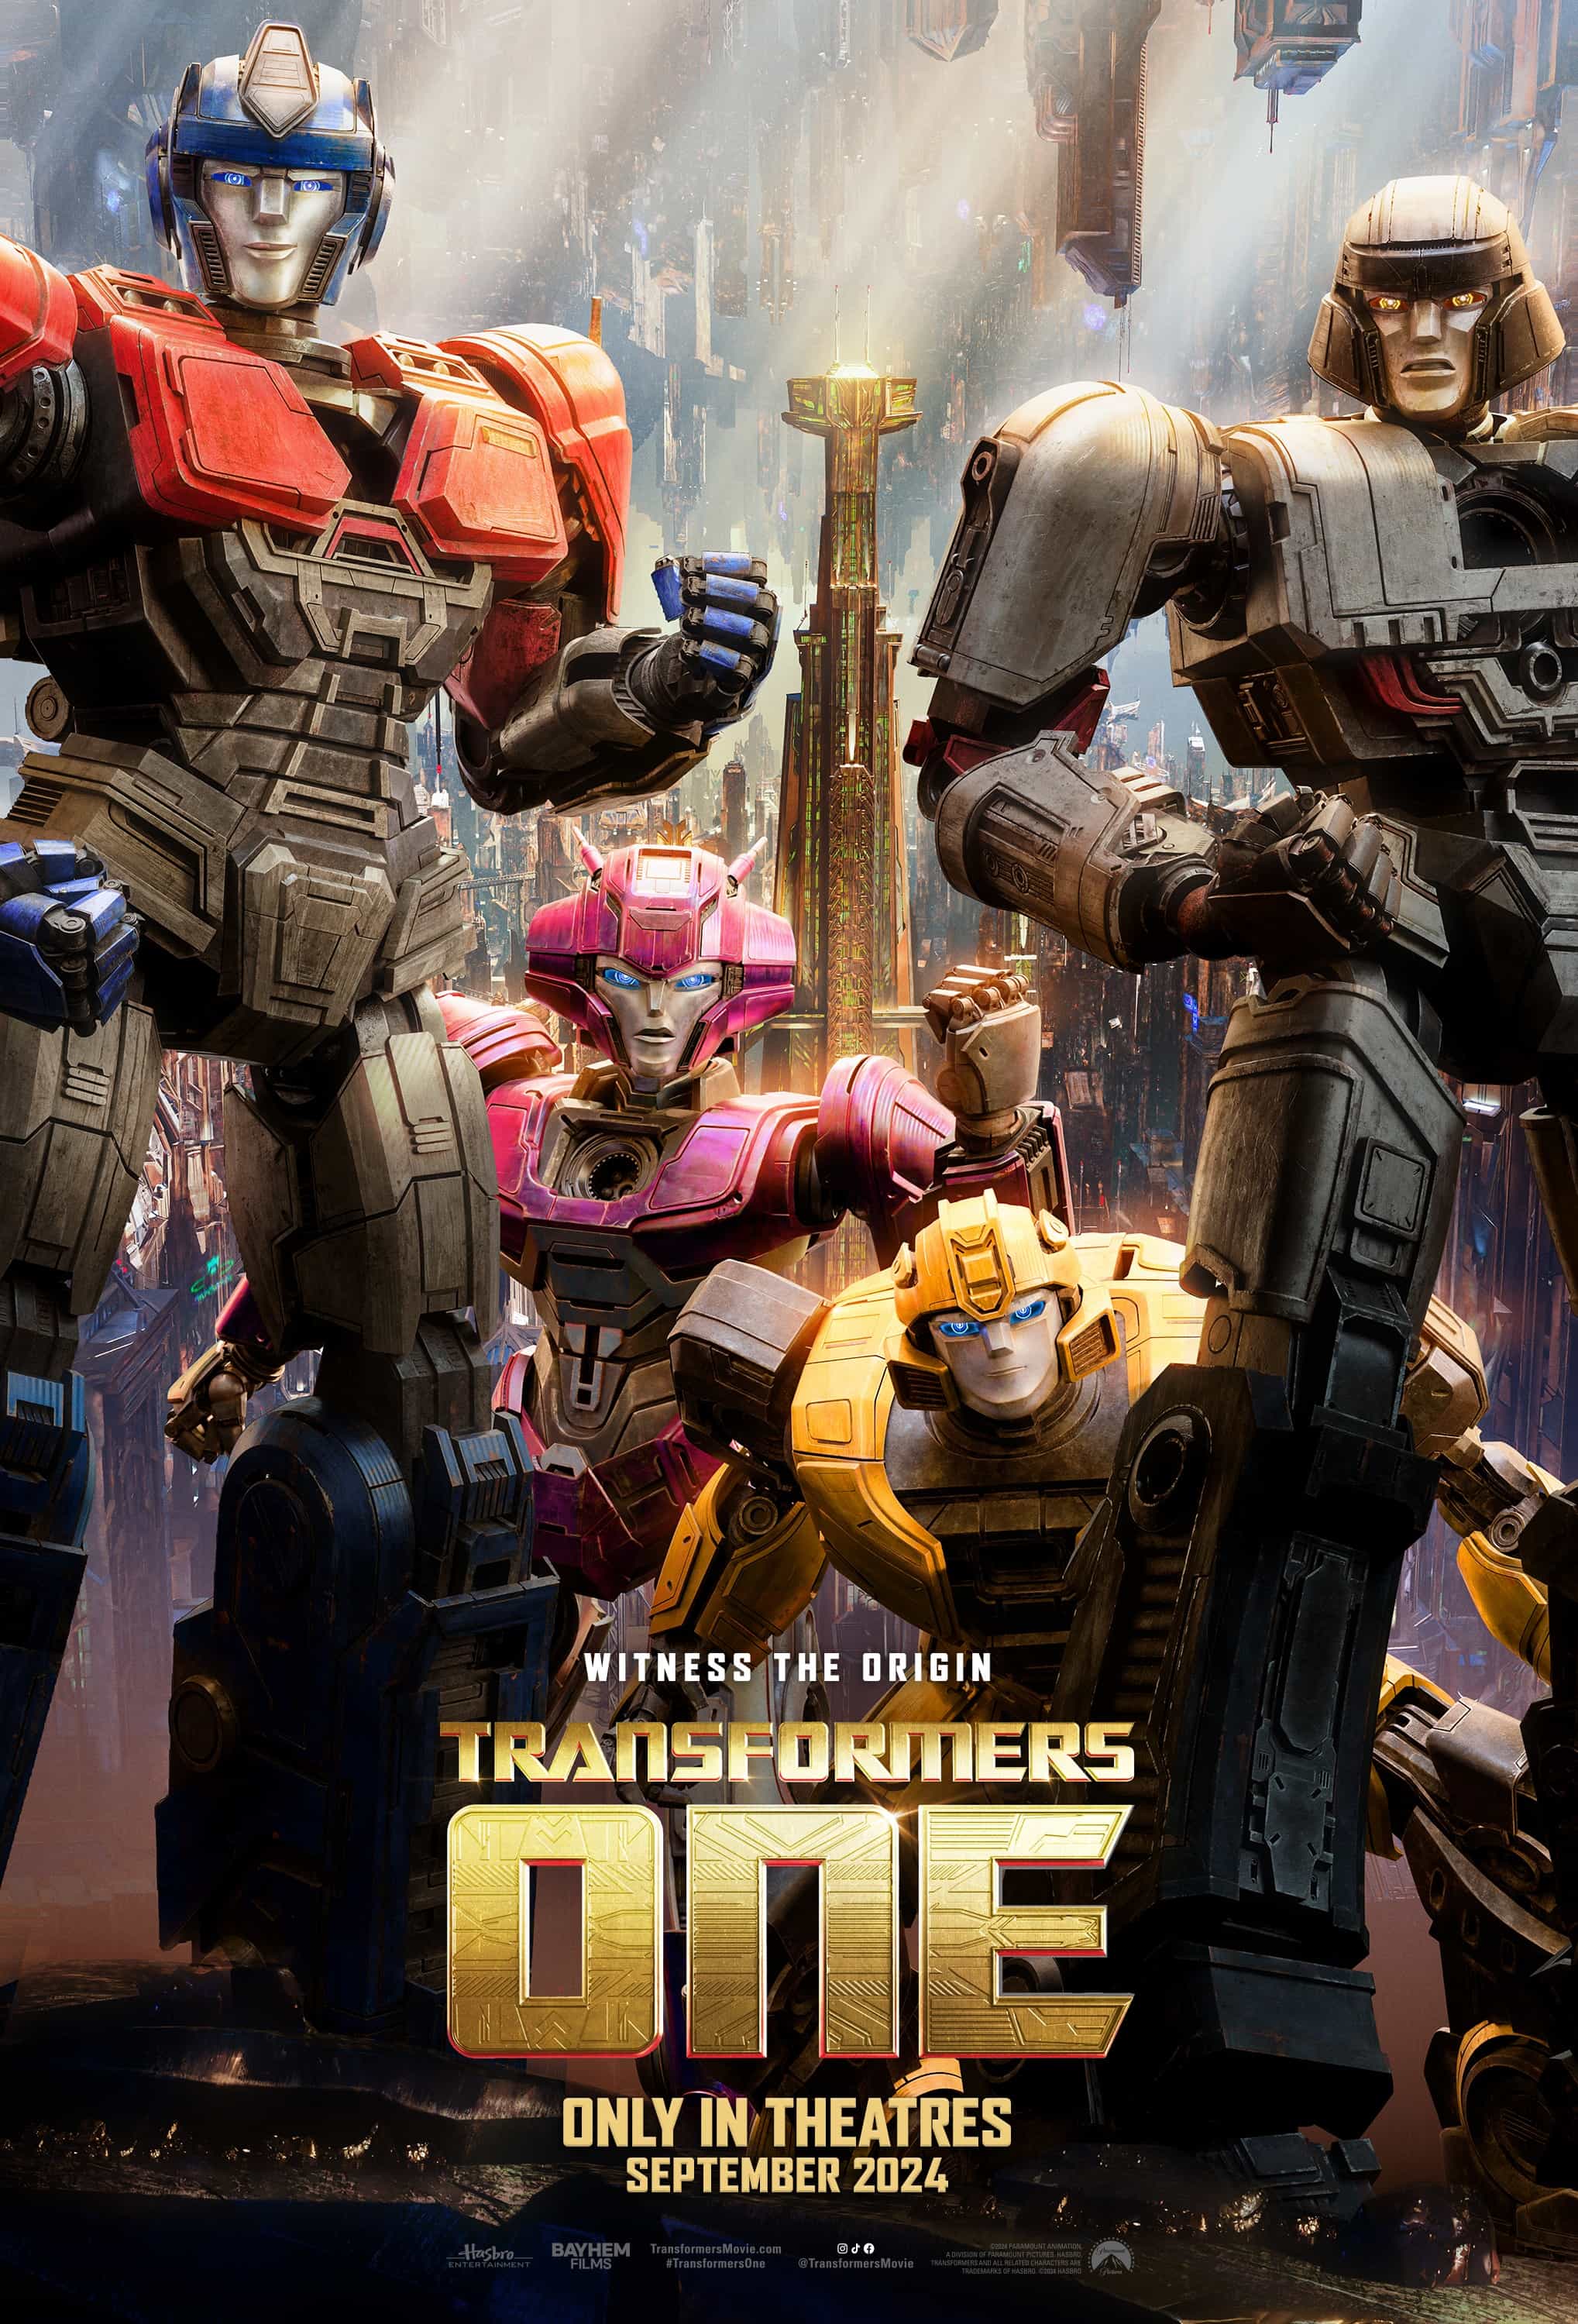 Check out the new trailer and poster for upcoming movie Transformers: One which stars Scarlett Johansson and Jon Hamm - movie UK release date 11th October 2024 #transformersone